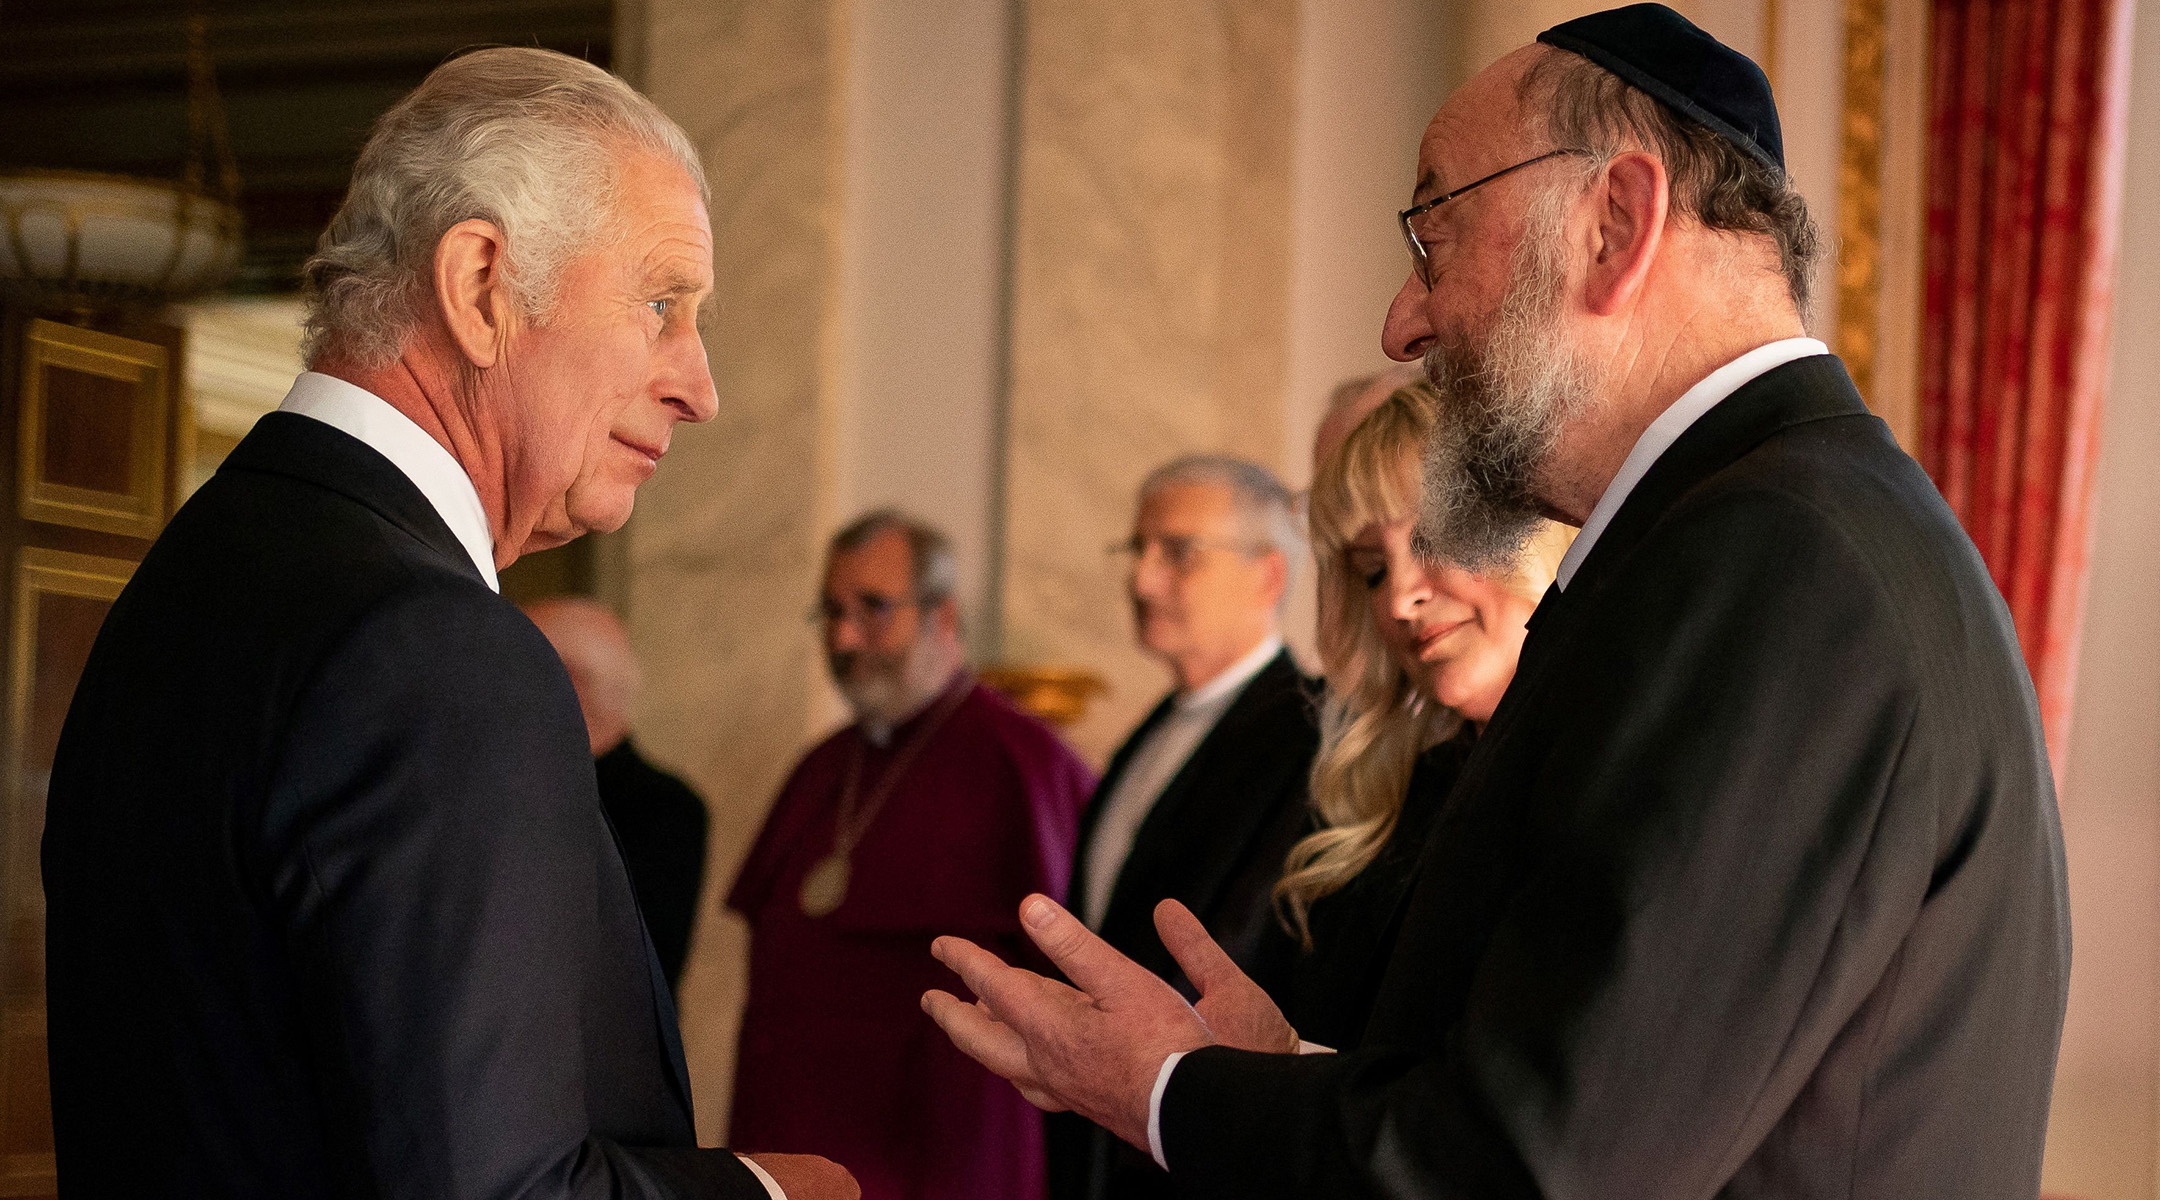 King Charles III meets Chief Rabbi Ephraim Mirvis during a reception with faith leaders at Buckingham Palace in London, Sept. 16, 2022. (Aaron Chown/Pool/AFP via Getty Images)